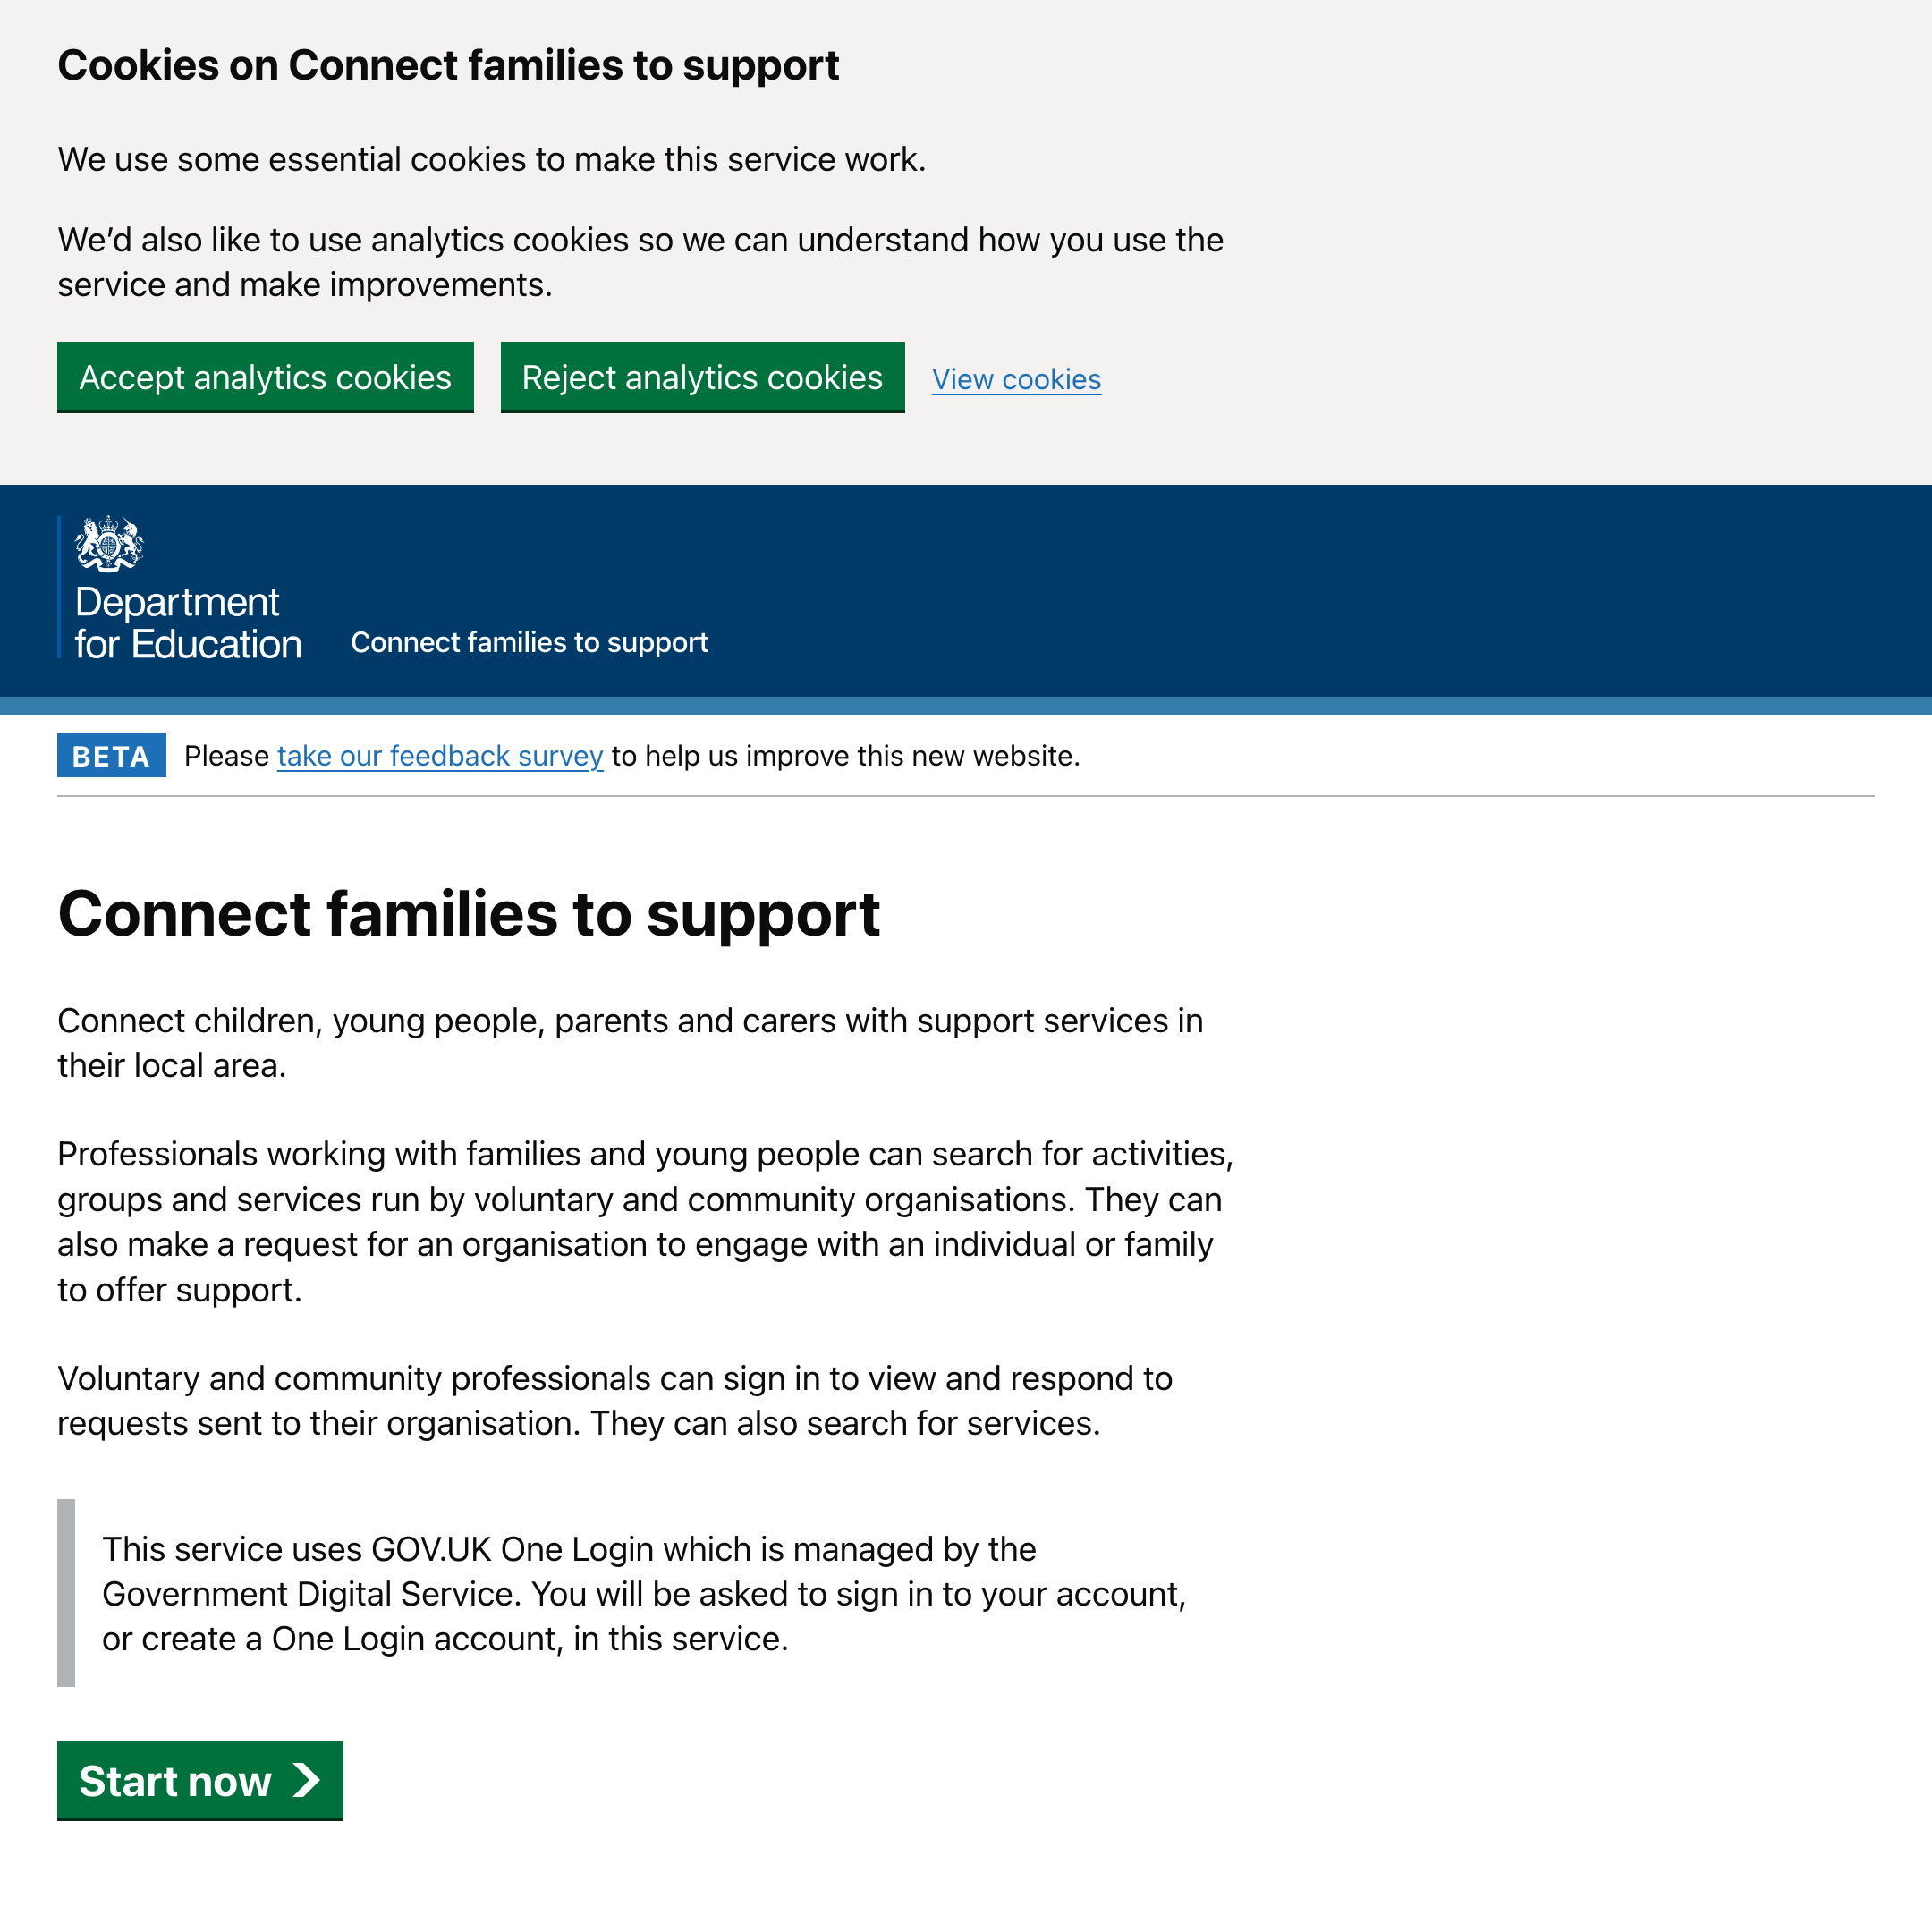 Connect families to support